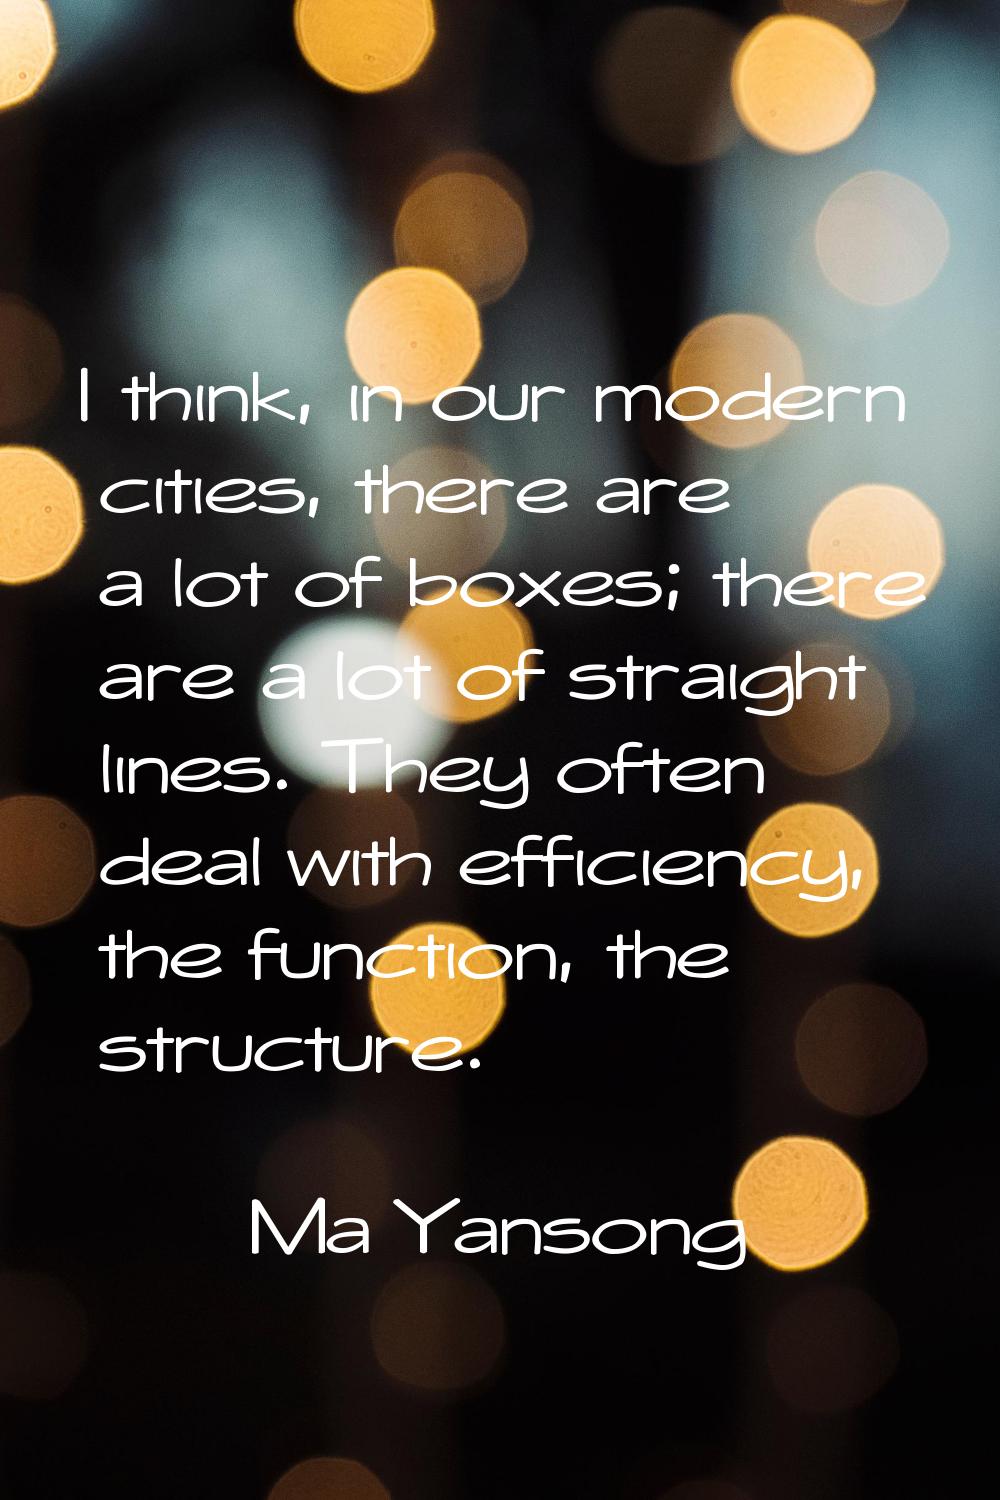 I think, in our modern cities, there are a lot of boxes; there are a lot of straight lines. They of